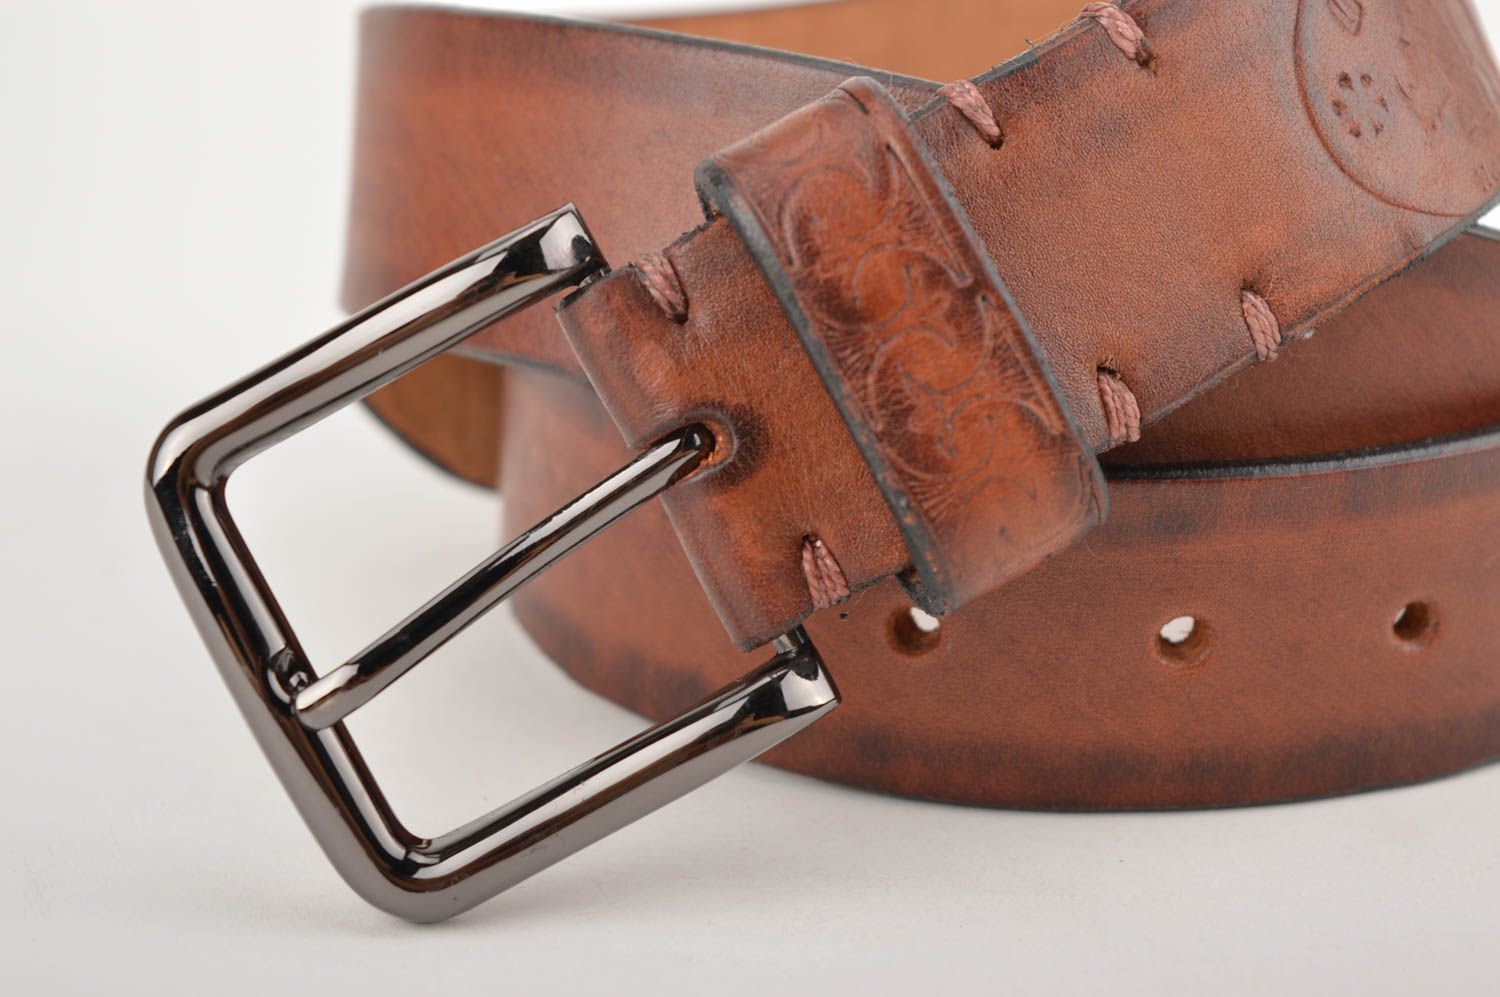 Beautiful handmade leather belt accessories for men leather goods gifts for him photo 4